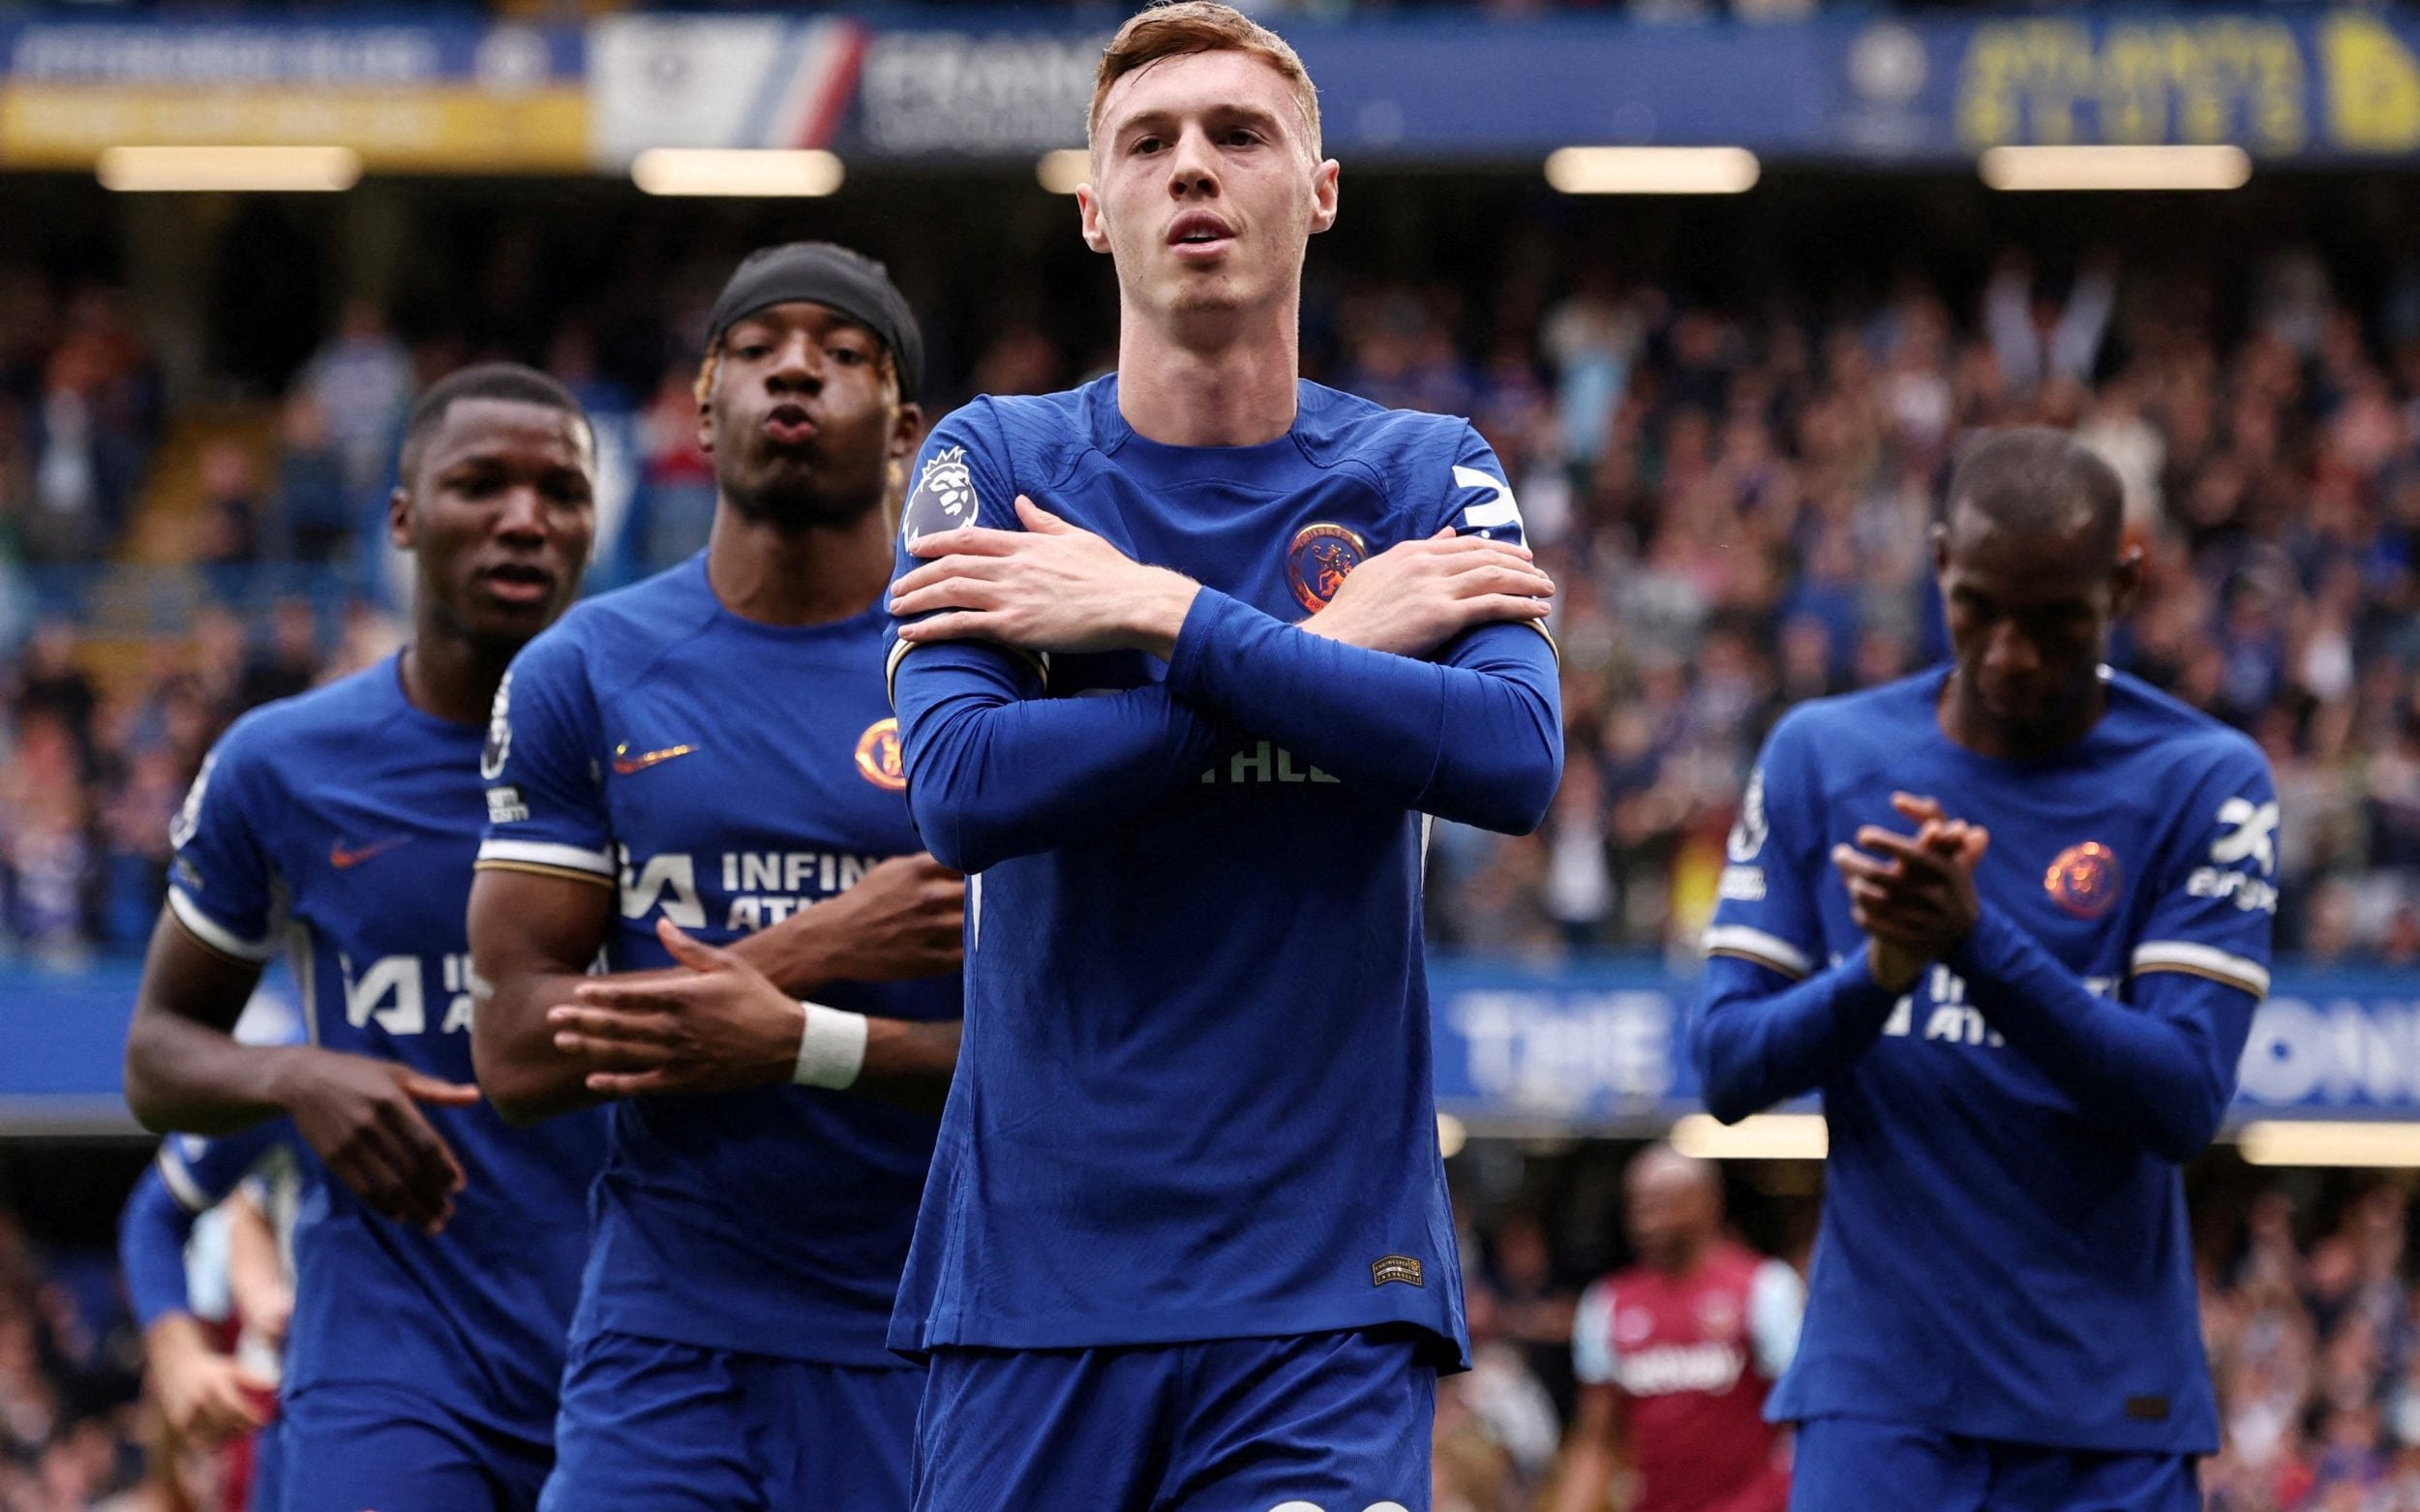 chelsea finally resembling a team – as long as owners don’t rip it up again